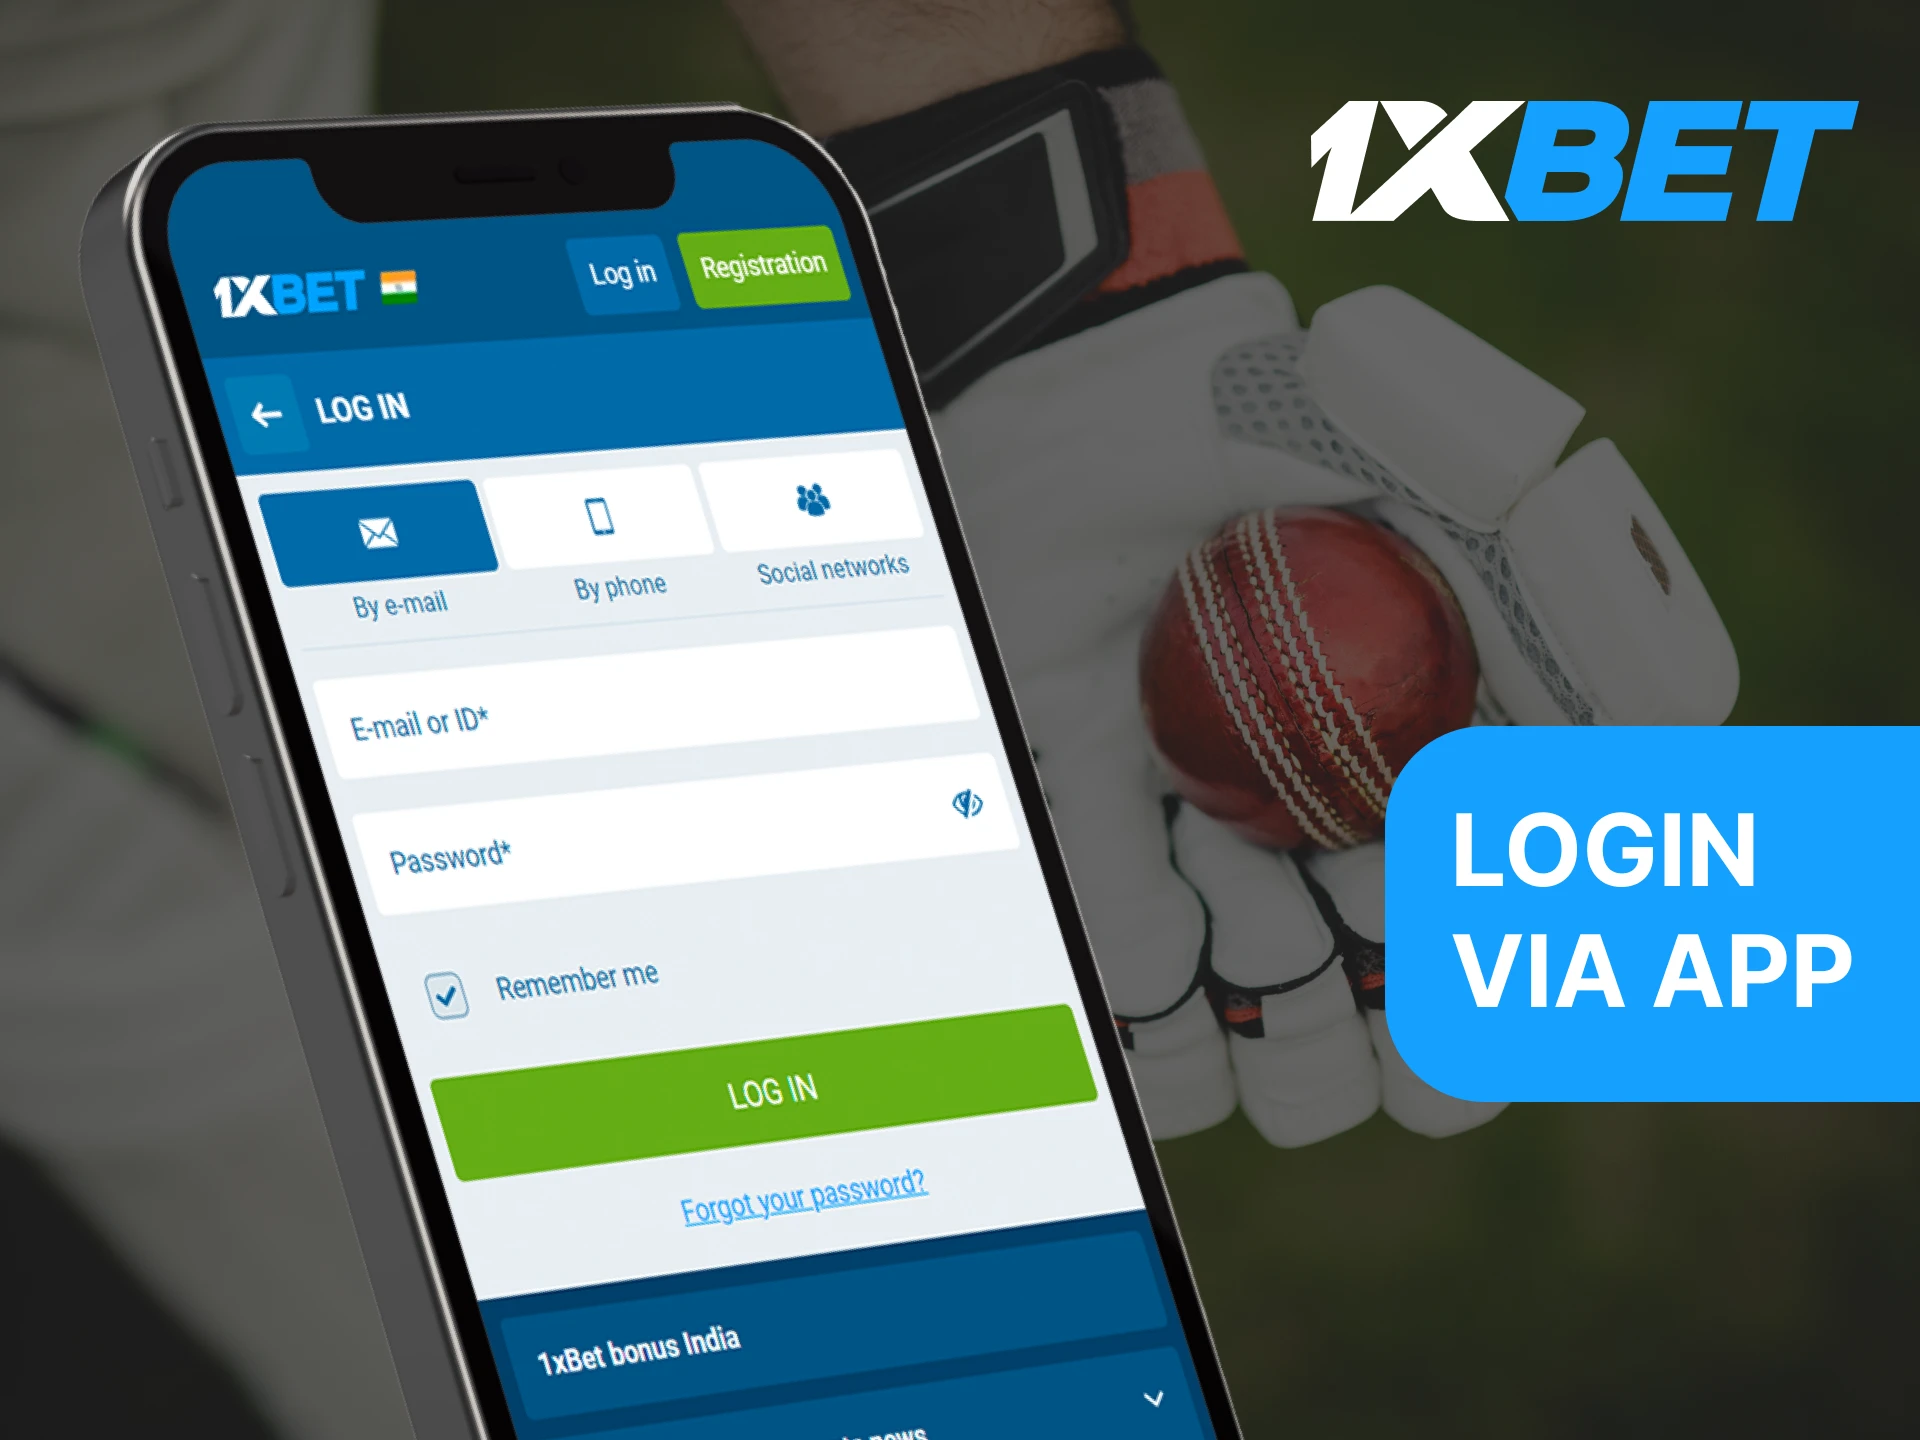 If you have the 1xBet mobile app, you don't need to create a second account, just log into your existing one.